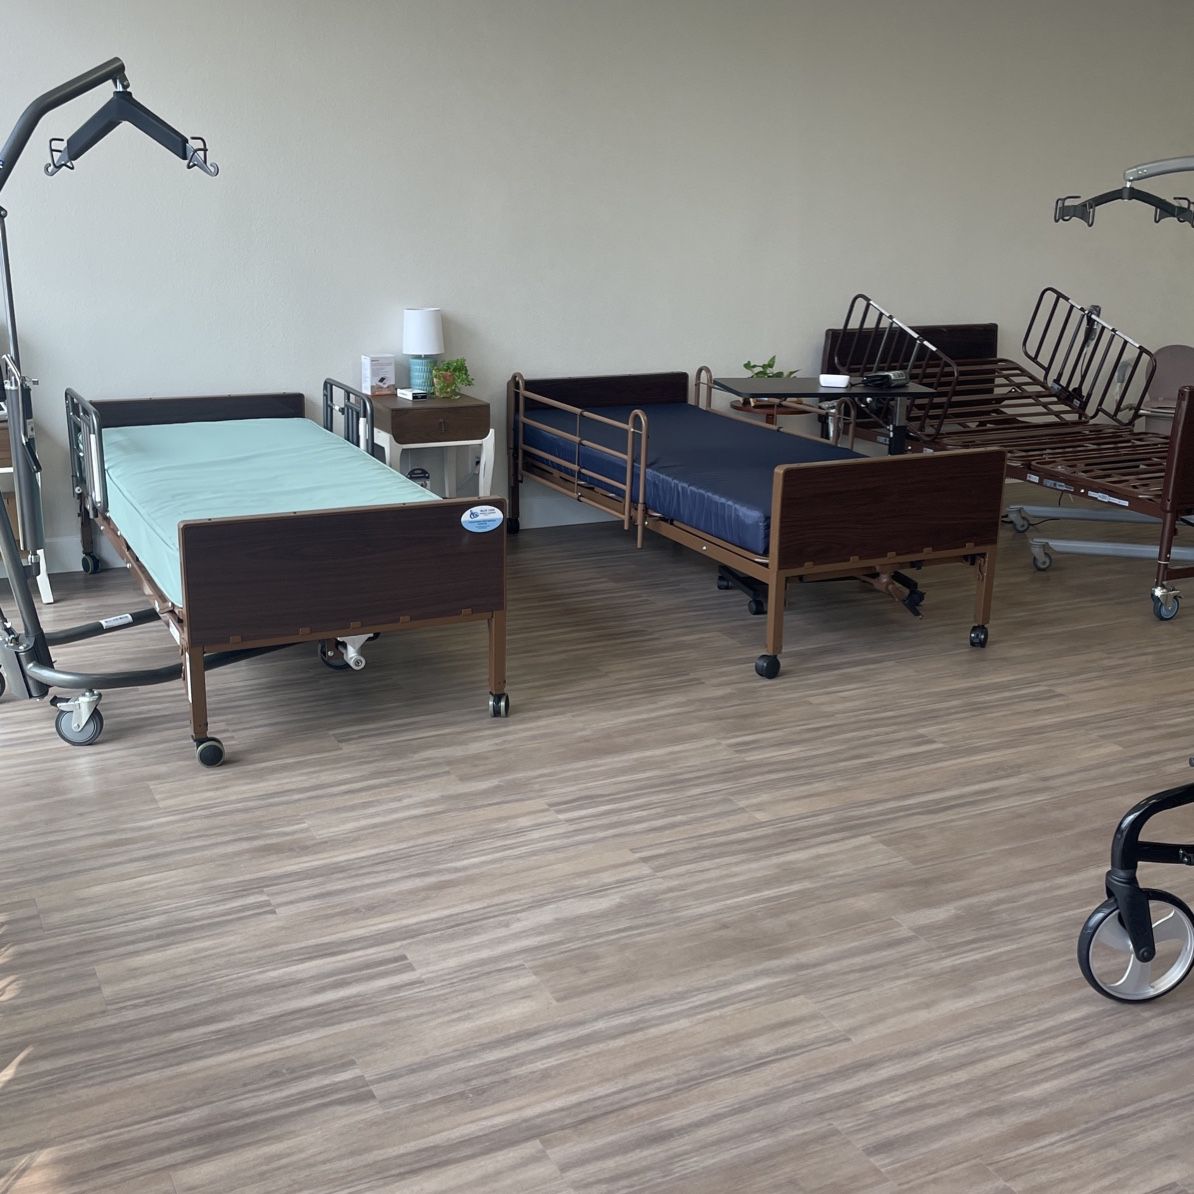 BRAND NEW - HOSPITAL BEDS TO SELL starting in $599